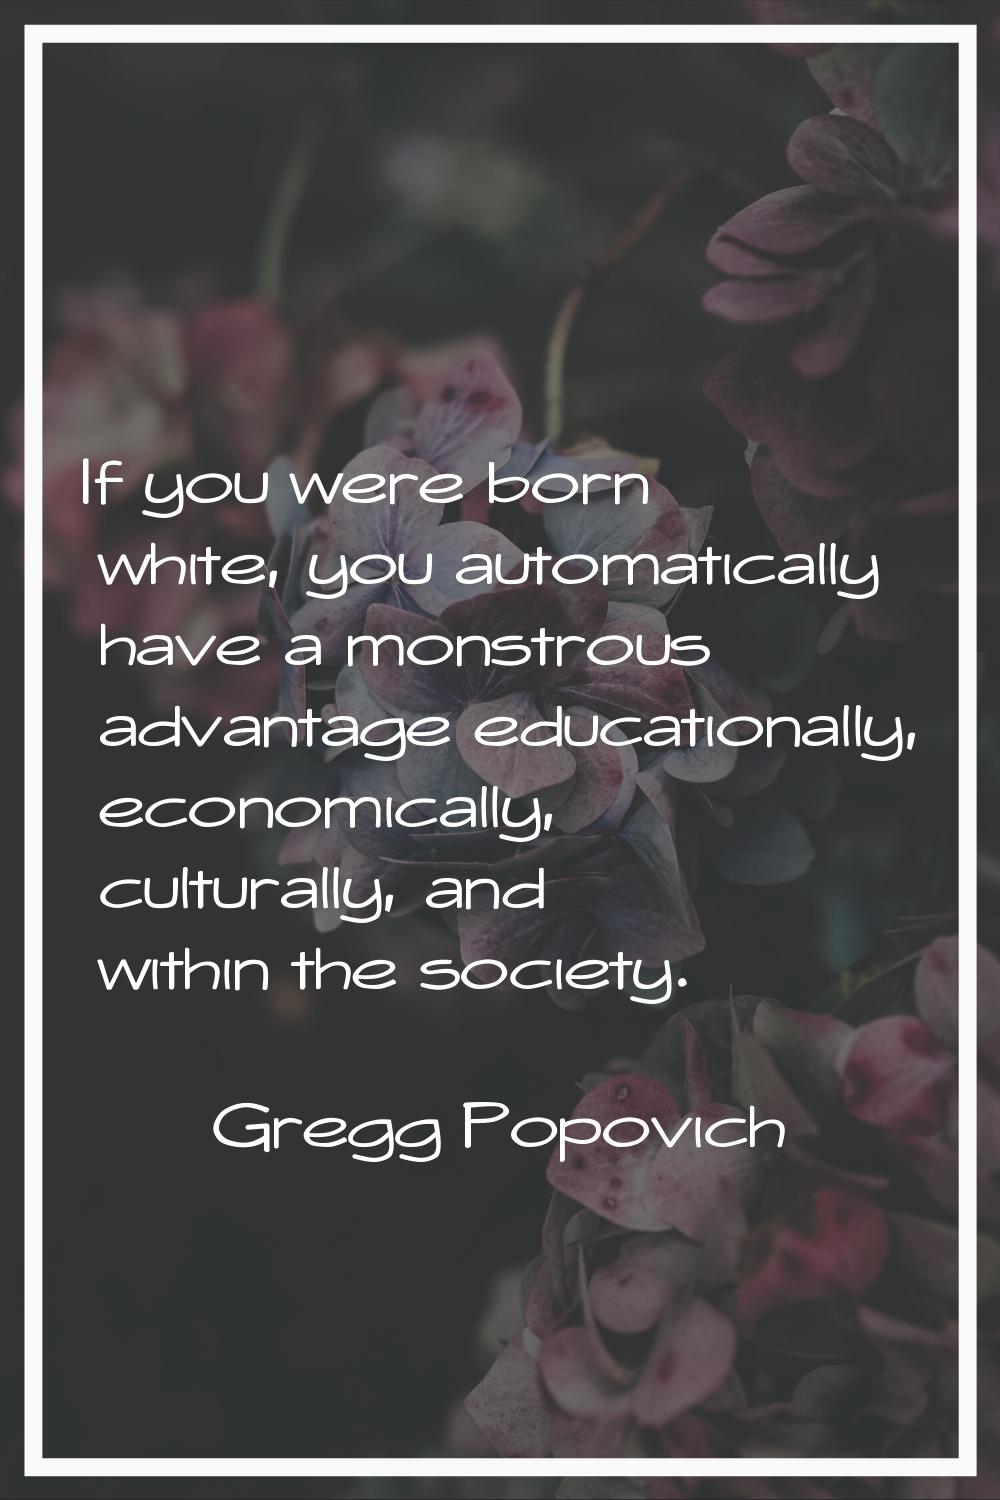 If you were born white, you automatically have a monstrous advantage educationally, economically, c